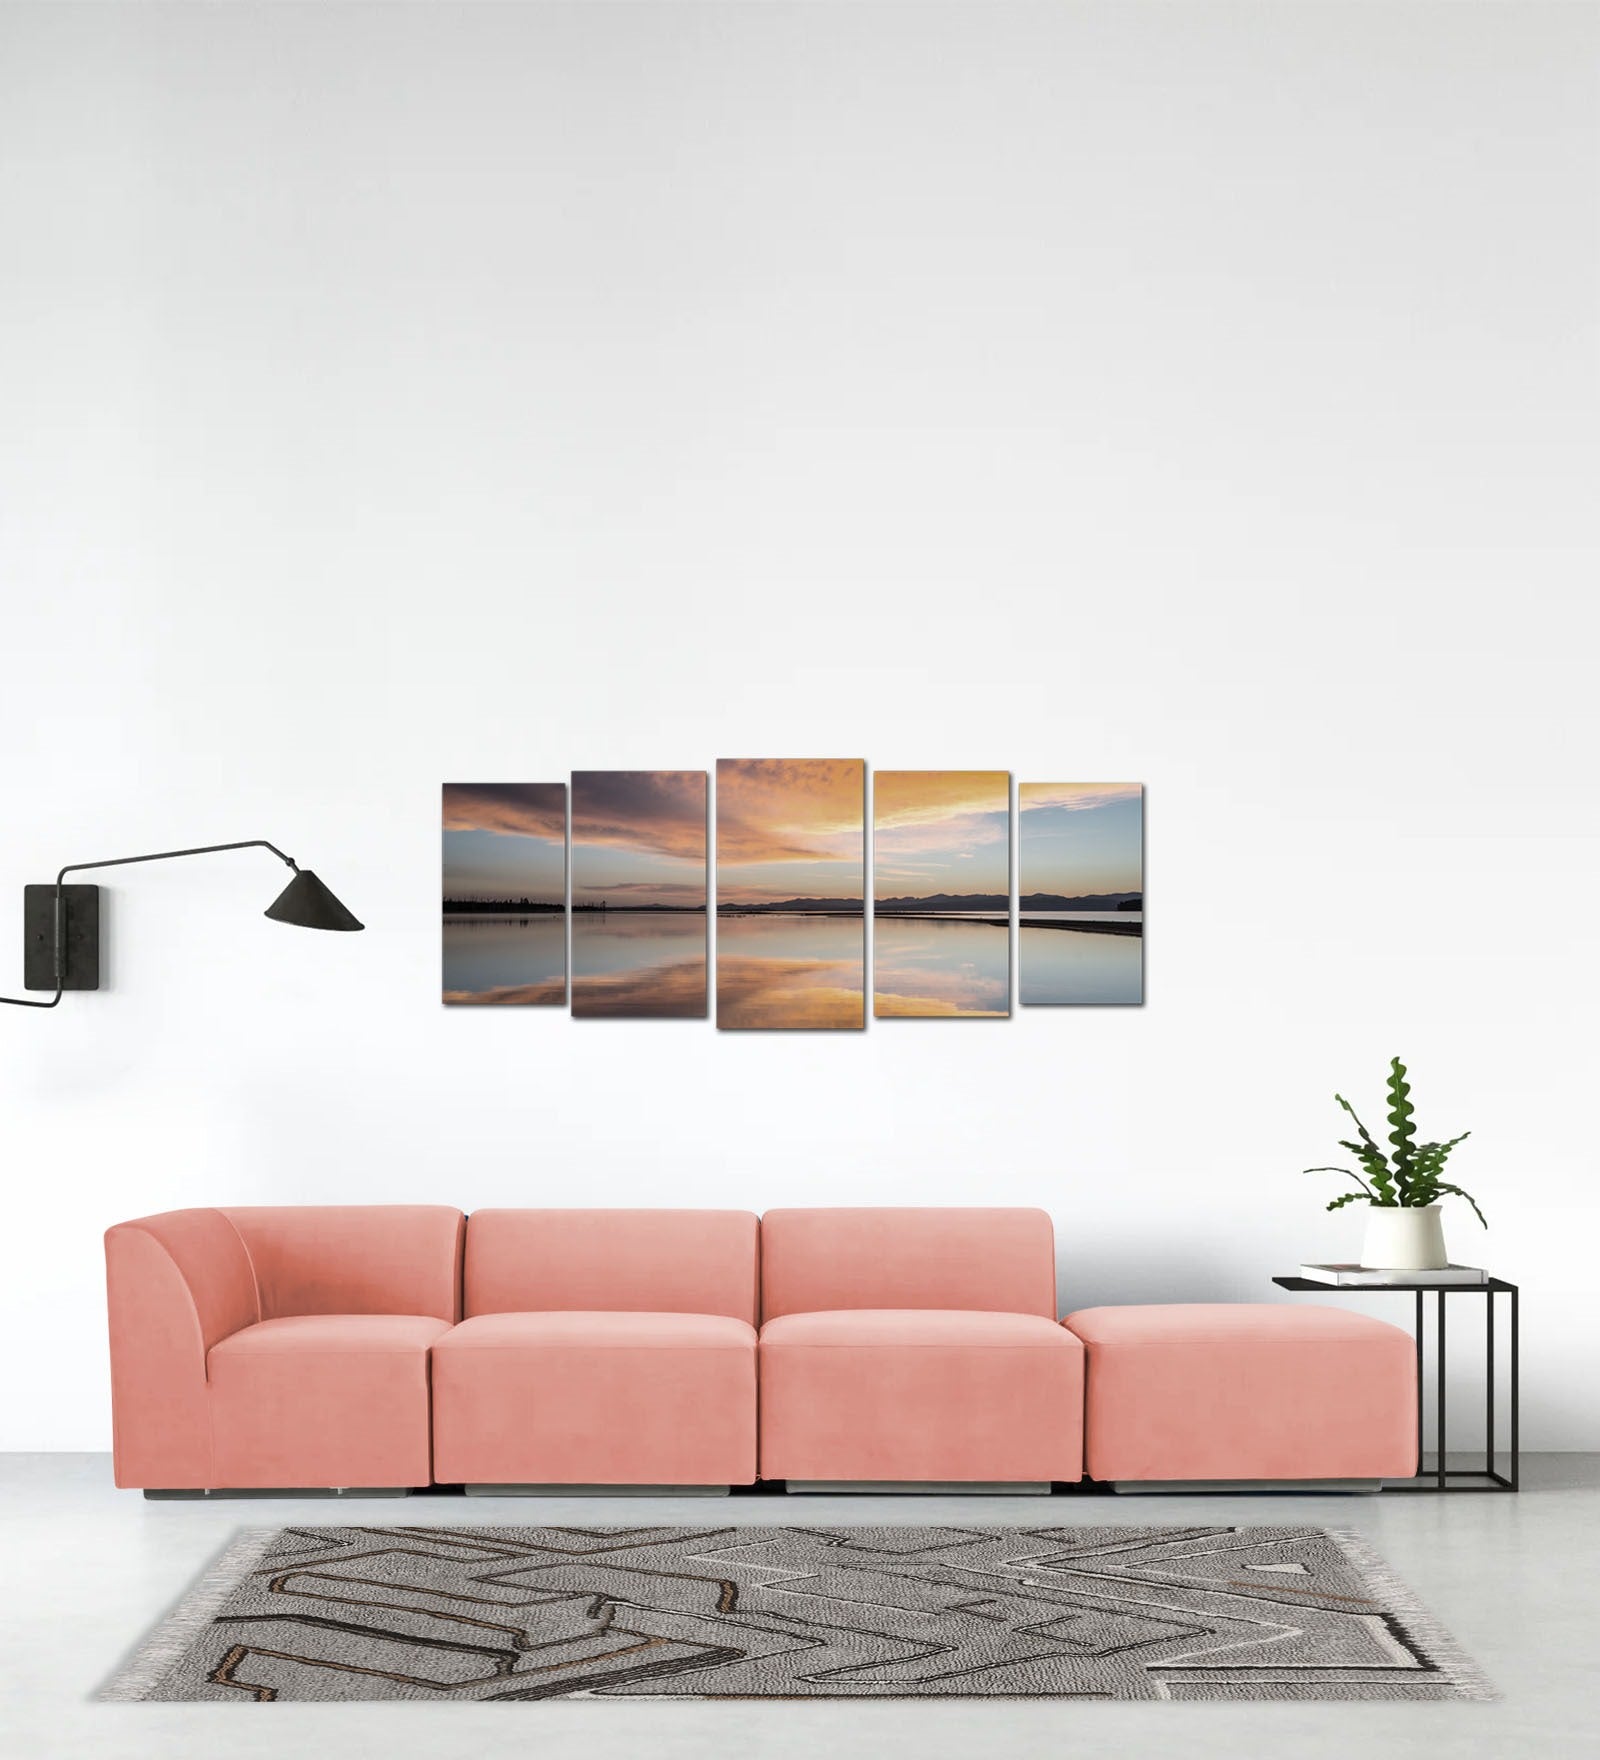 Bufa Velvet RHS Sectional Sofa In Blush Pink Colour With Ottoman